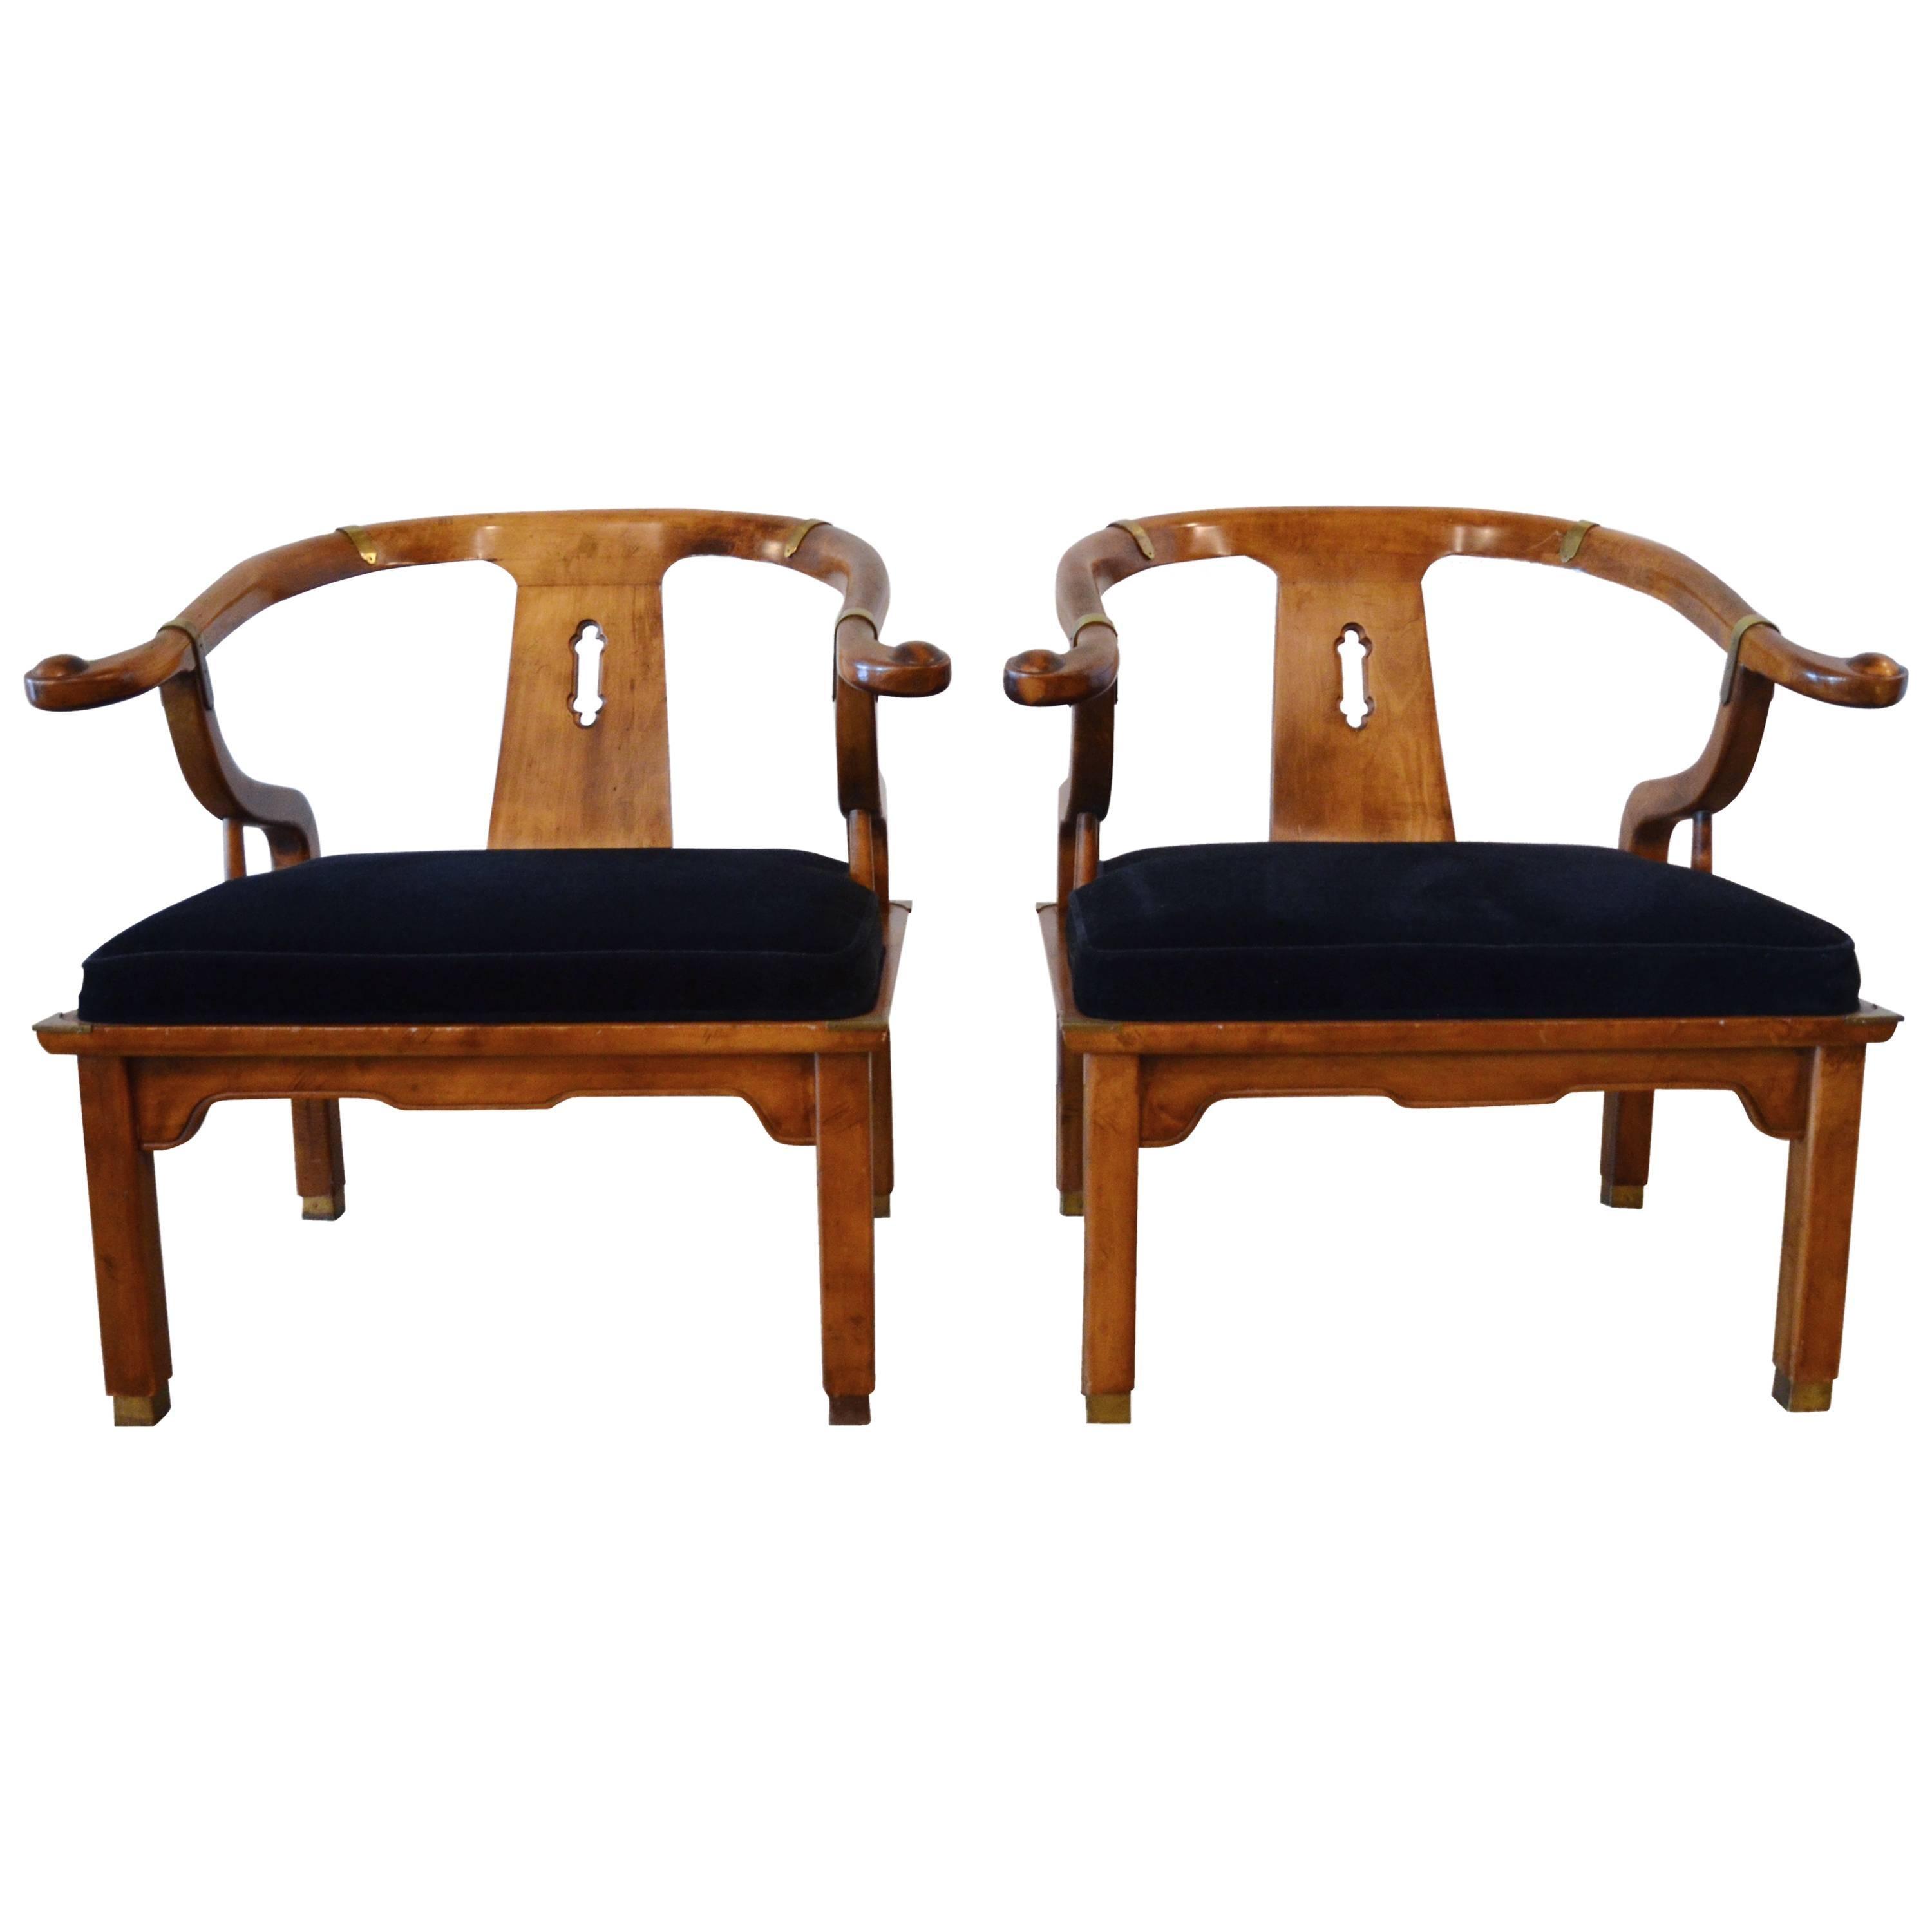 James Mont Style Chairs in Mohair, Pair